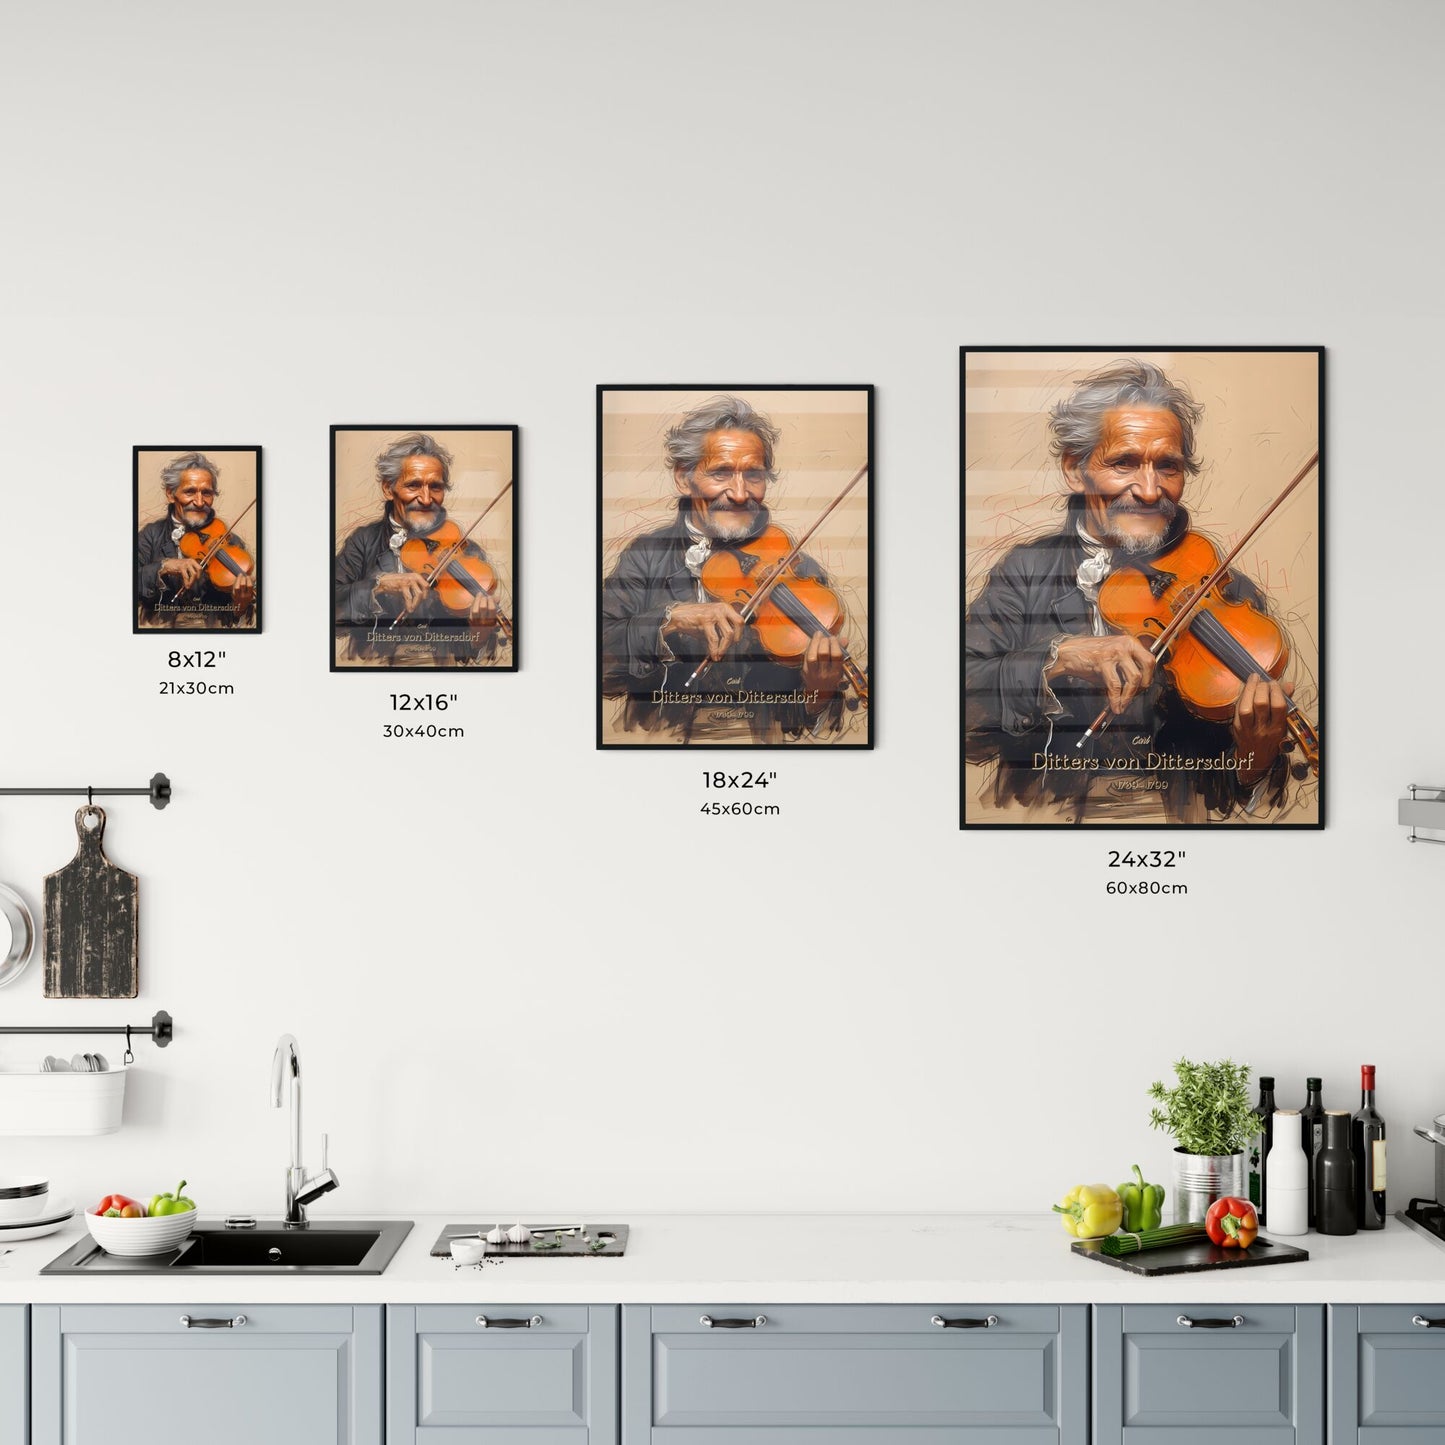 Carl, Ditters von Dittersdorf, 1739 - 1799, A Poster of a man playing a violin Default Title